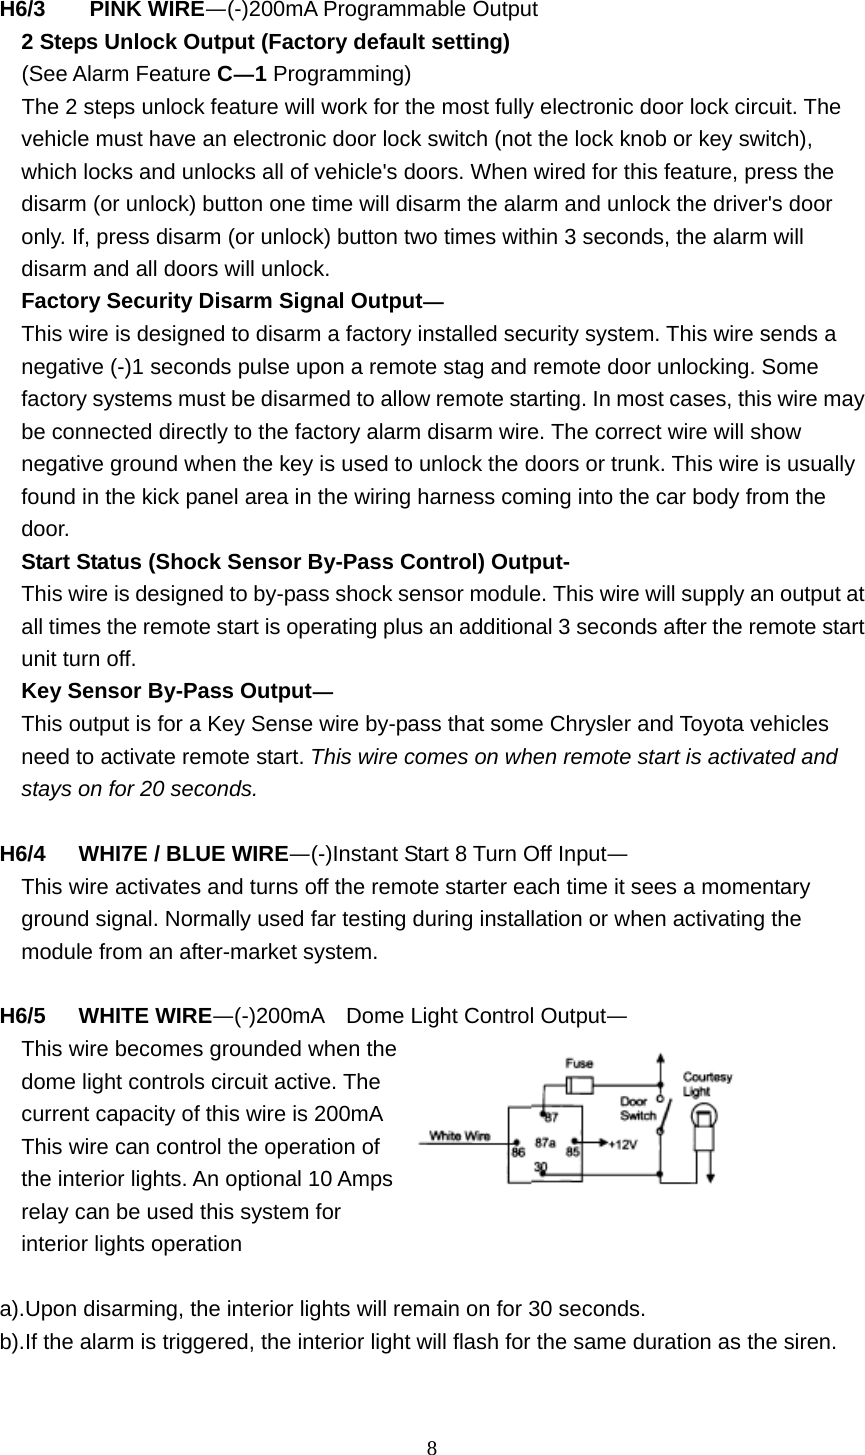  8 H6/3    PINK WIRE—(-)200mA Programmable Output   2 Steps Unlock Output (Factory default setting)   (See Alarm Feature C—1 Programming)     The 2 steps unlock feature will work for the most fully electronic door lock circuit. The vehicle must have an electronic door lock switch (not the lock knob or key switch), which locks and unlocks all of vehicle&apos;s doors. When wired for this feature, press the disarm (or unlock) button one time will disarm the alarm and unlock the driver&apos;s door only. If, press disarm (or unlock) button two times within 3 seconds, the alarm will disarm and all doors will unlock. Factory Security Disarm Signal Output— This wire is designed to disarm a factory installed security system. This wire sends a negative (-)1 seconds pulse upon a remote stag and remote door unlocking. Some factory systems must be disarmed to allow remote starting. In most cases, this wire may be connected directly to the factory alarm disarm wire. The correct wire will show negative ground when the key is used to unlock the doors or trunk. This wire is usually found in the kick panel area in the wiring harness coming into the car body from the door. Start Status (Shock Sensor By-Pass Control) Output- This wire is designed to by-pass shock sensor module. This wire will supply an output at all times the remote start is operating plus an additional 3 seconds after the remote start unit turn off. Key Sensor By-Pass Output— This output is for a Key Sense wire by-pass that some Chrysler and Toyota vehicles need to activate remote start. This wire comes on when remote start is activated and stays on for 20 seconds.  H6/4   WHI7E / BLUE WIRE—(-)Instant Start 8 Turn Off Input— This wire activates and turns off the remote starter each time it sees a momentary ground signal. Normally used far testing during installation or when activating the module from an after-market system.  H6/5   WHITE WIRE—(-)200mA    Dome Light Control Output— This wire becomes grounded when the dome light controls circuit active. The current capacity of this wire is 200mA This wire can control the operation of the interior lights. An optional 10 Amps relay can be used this system for interior lights operation  a).Upon disarming, the interior lights will remain on for 30 seconds. b).If the alarm is triggered, the interior light will flash for the same duration as the siren.  